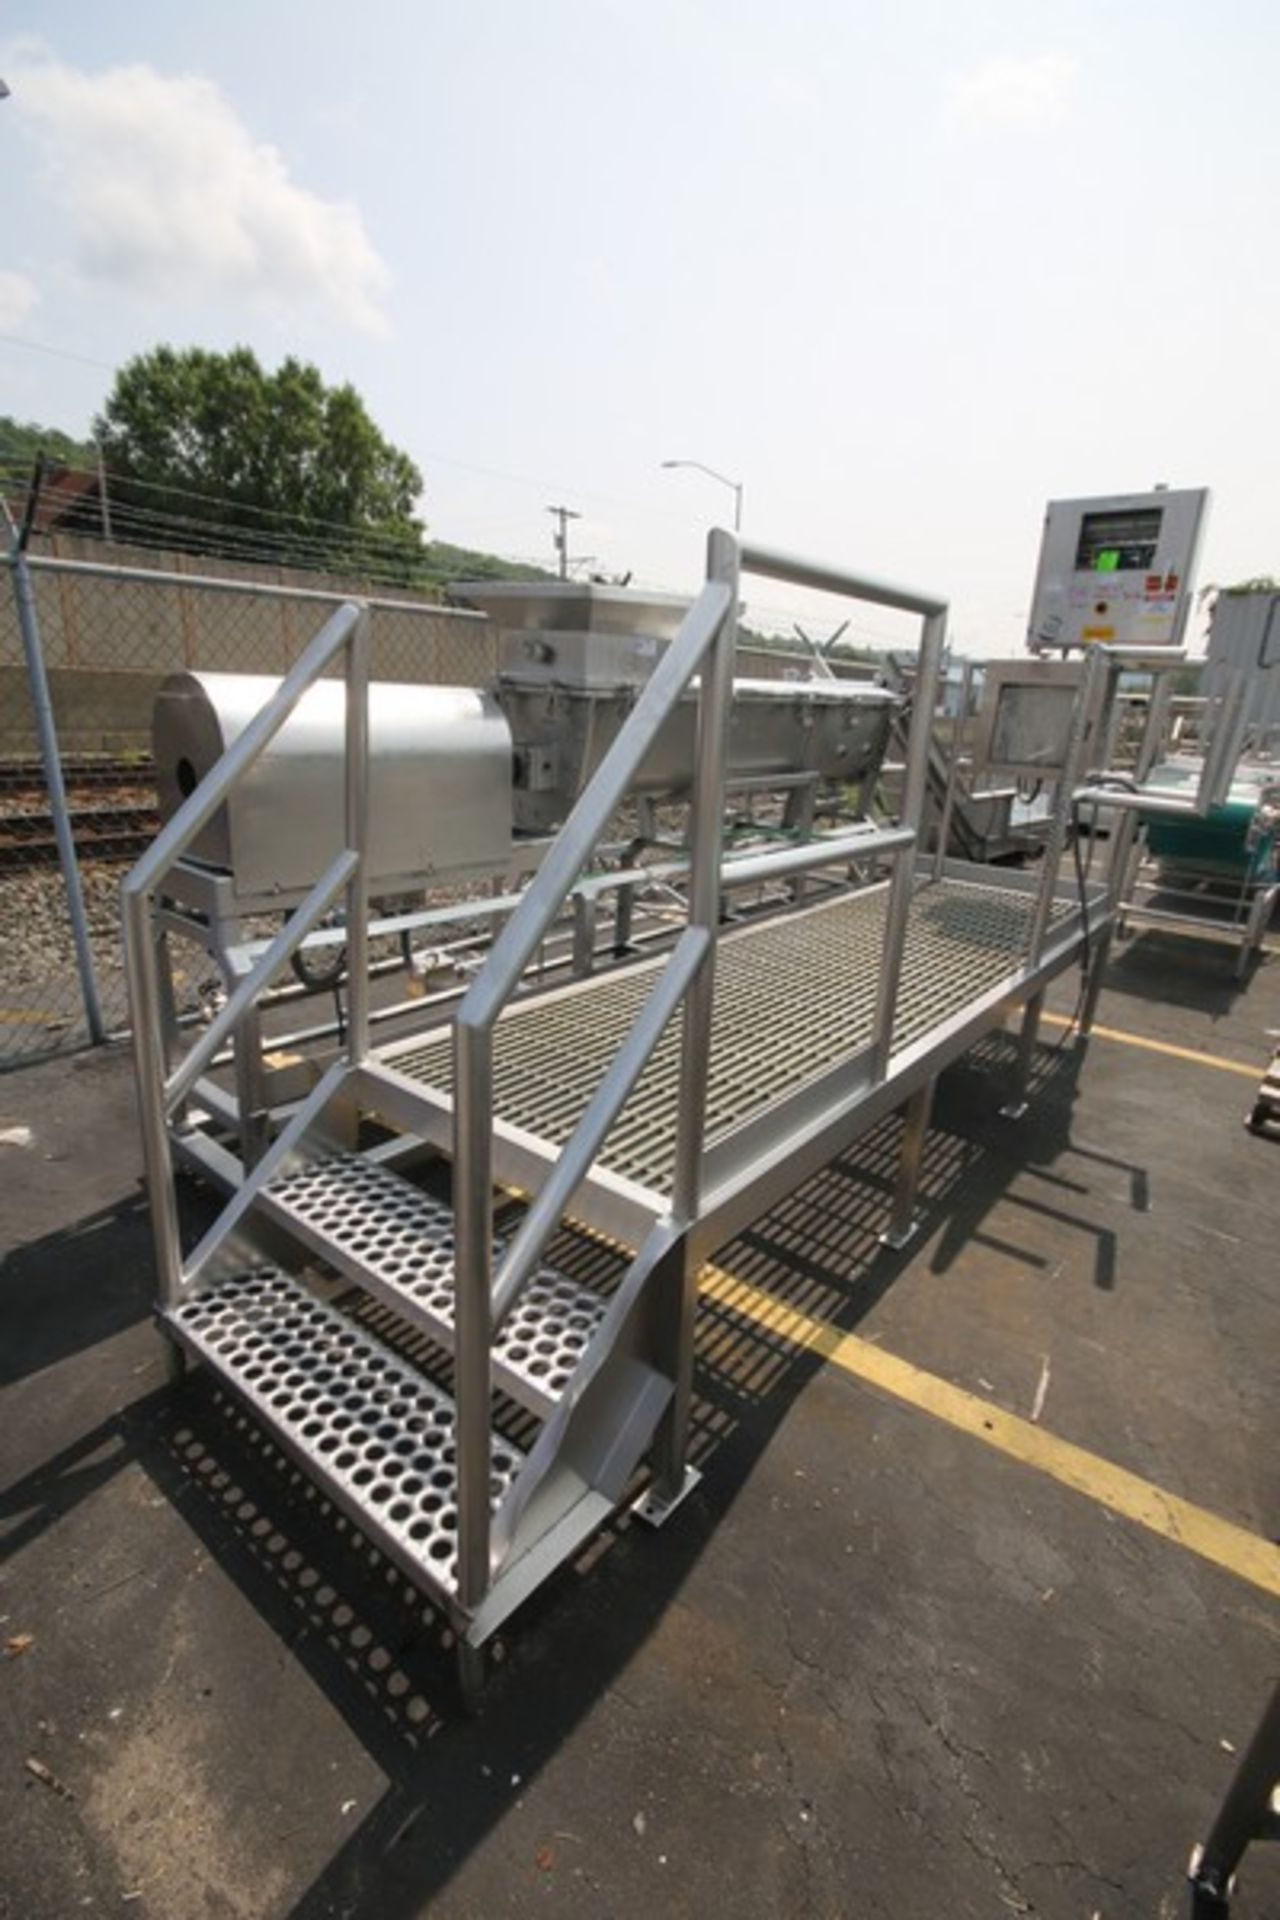 Koss S/S Cheese Cooker, SN 7S40, with 8' L x 15" W x 17" D Auger Area, 12" Auger, with Nord 20 hp - Image 12 of 14